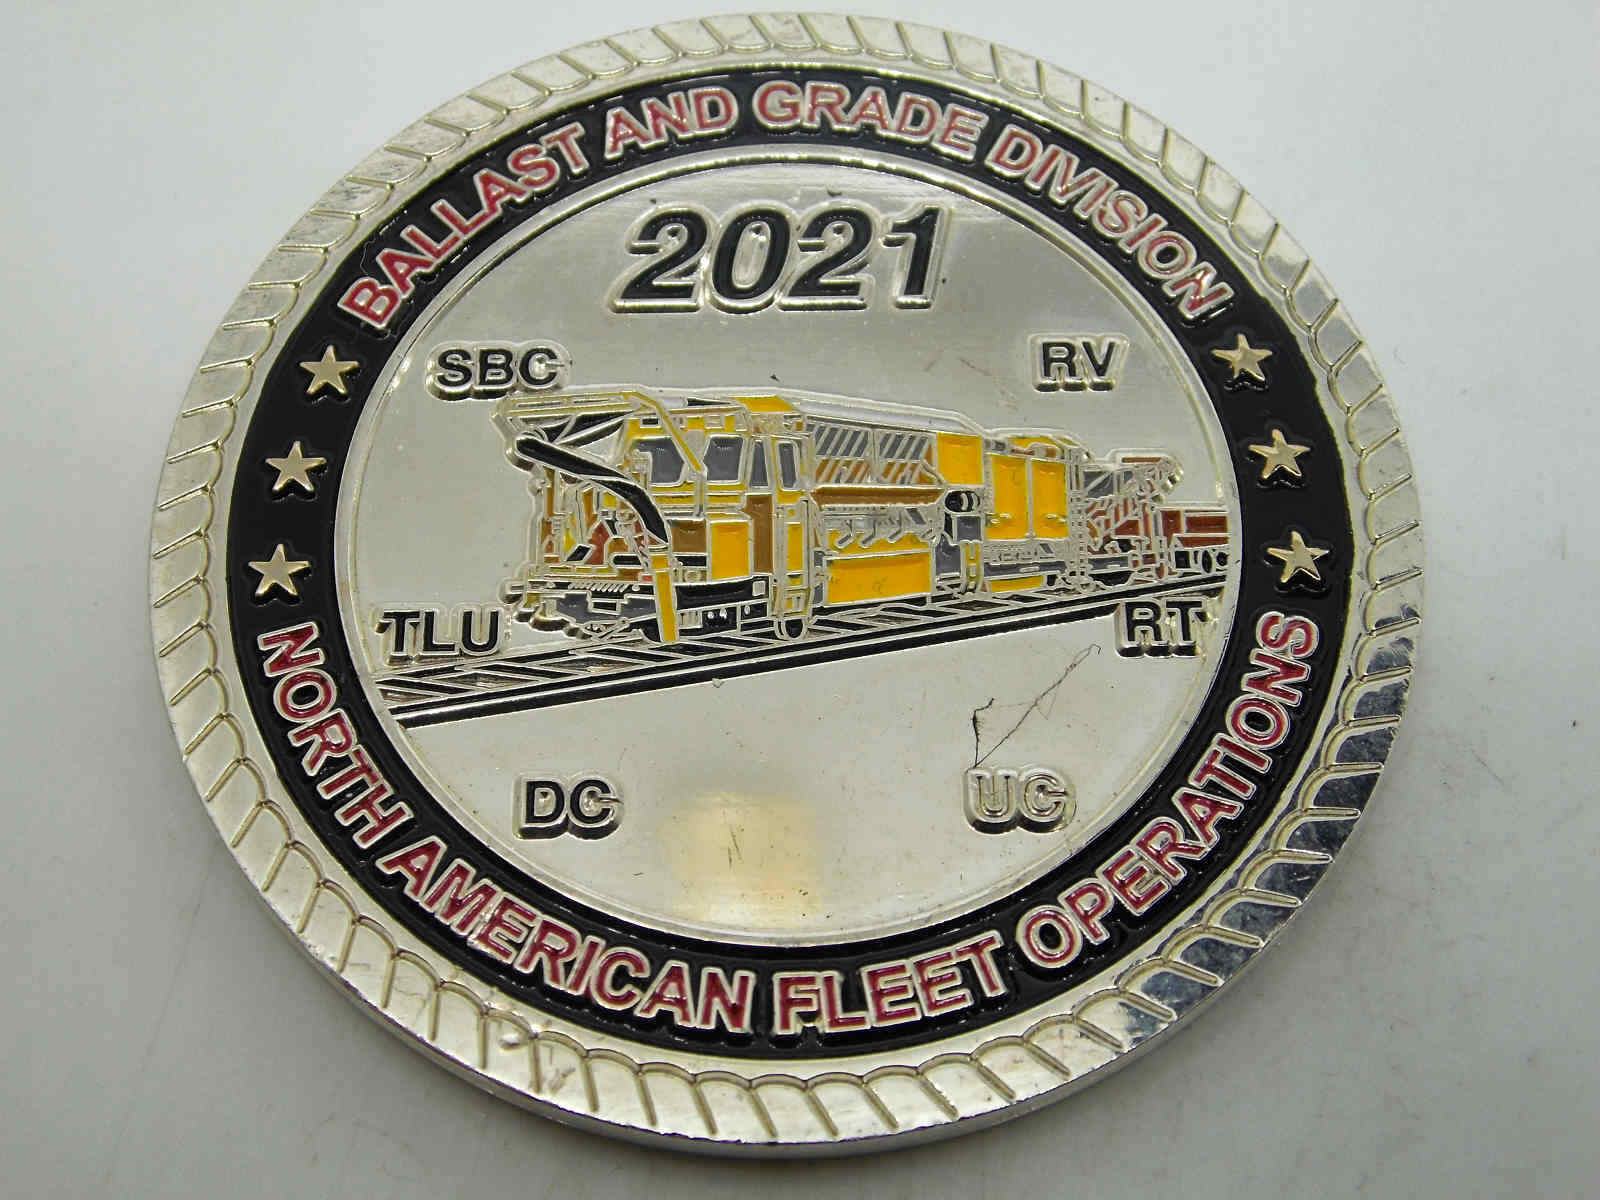 NORTH AMERICAN FLEET OPERATIONS BALLAST AND GRADE DIVISION CHALLENGE COIN